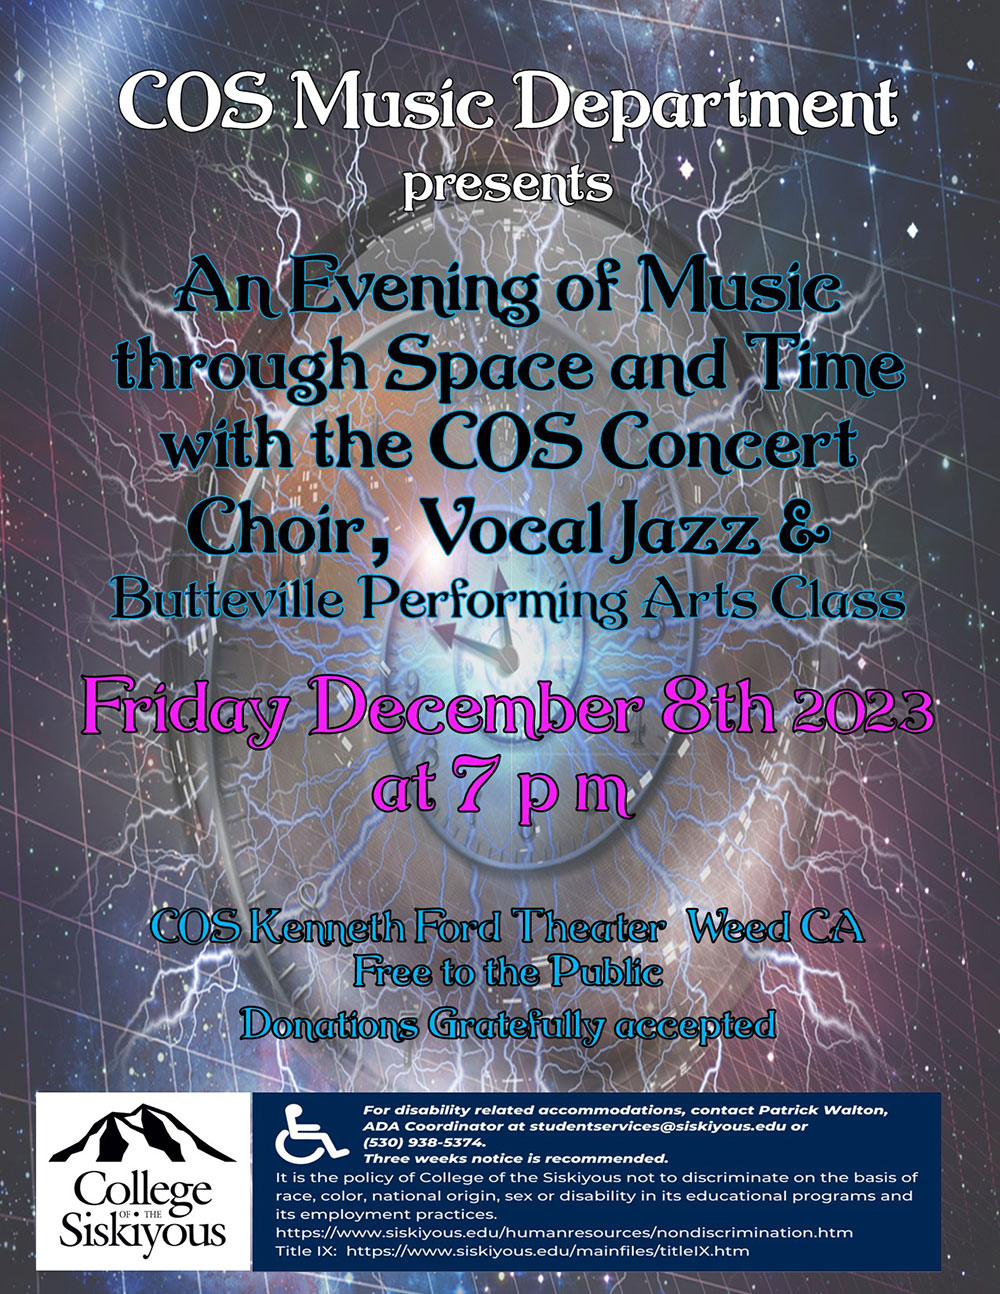 COS Music Department Presents: An Evening of Music through Space and Time with the COS Concert Choir, Vocal Jazz and Butteville Performing Arts Class. December 8 at 7:00 pm. COS Kenneth Ford Theater, Weed, CA. Free to the Public. Donations gratefully accepted.